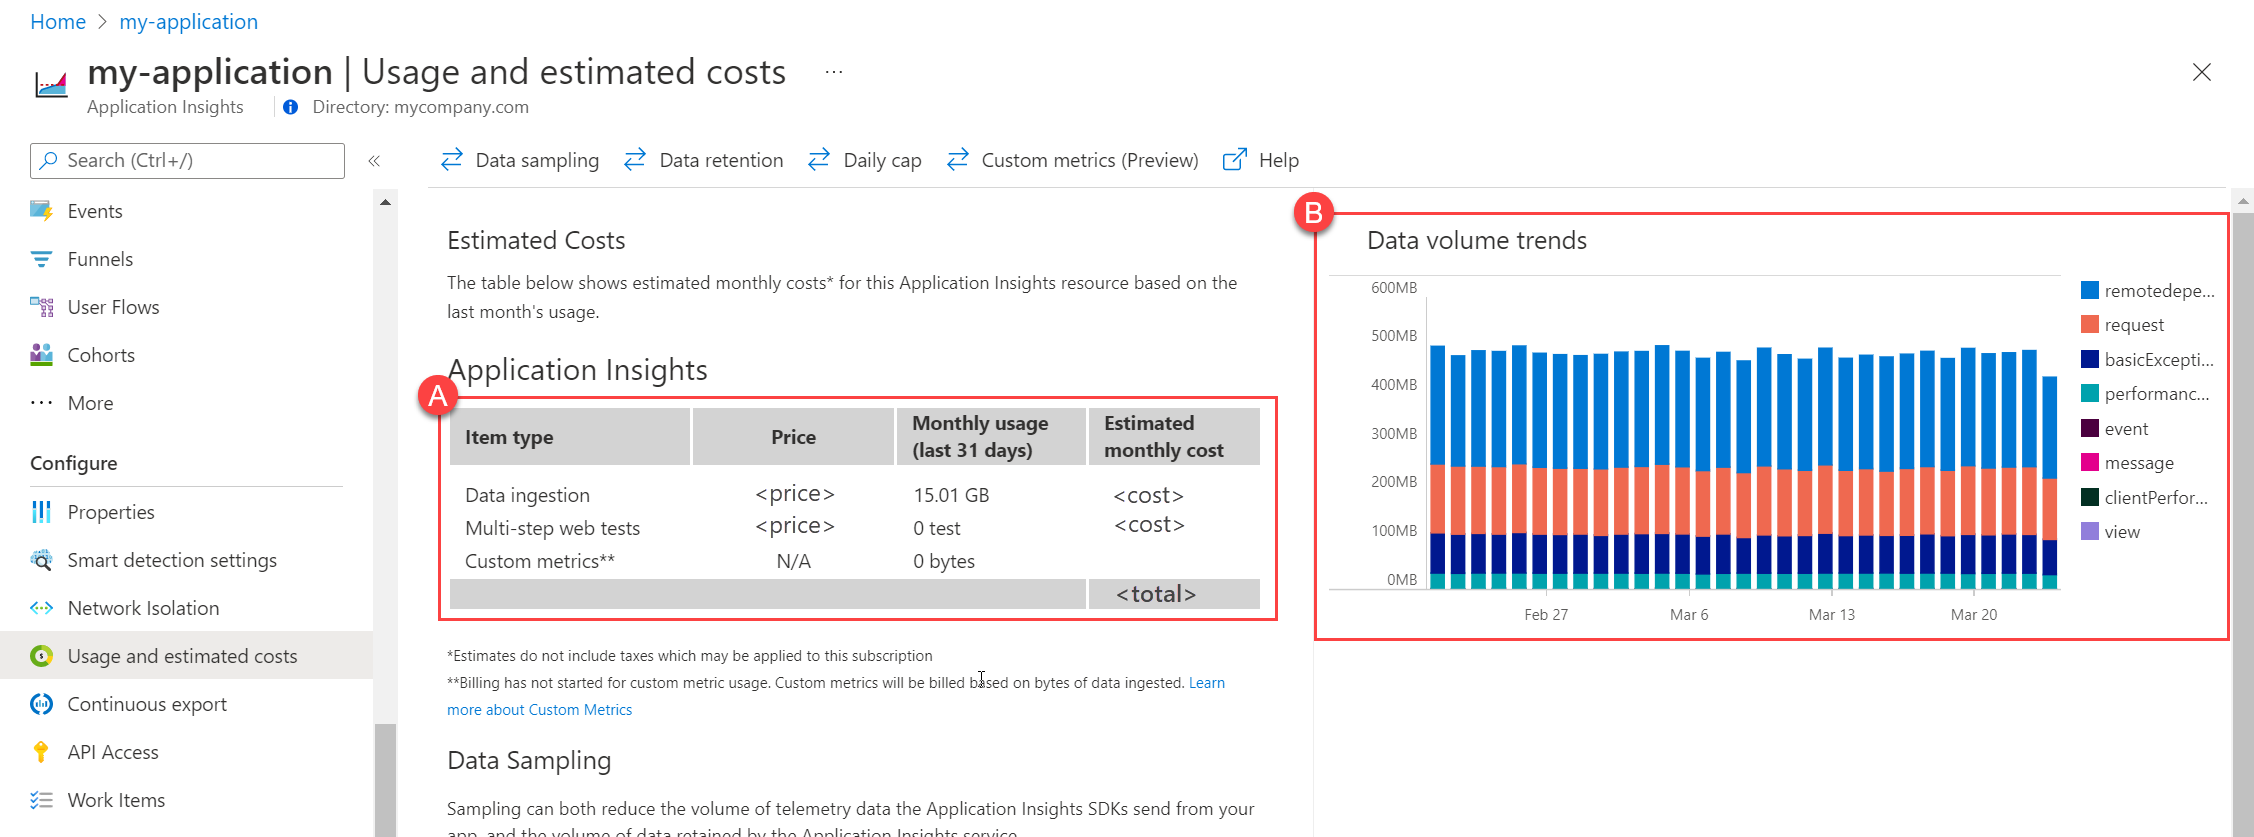 Application Insights classic application usage and estimated costs